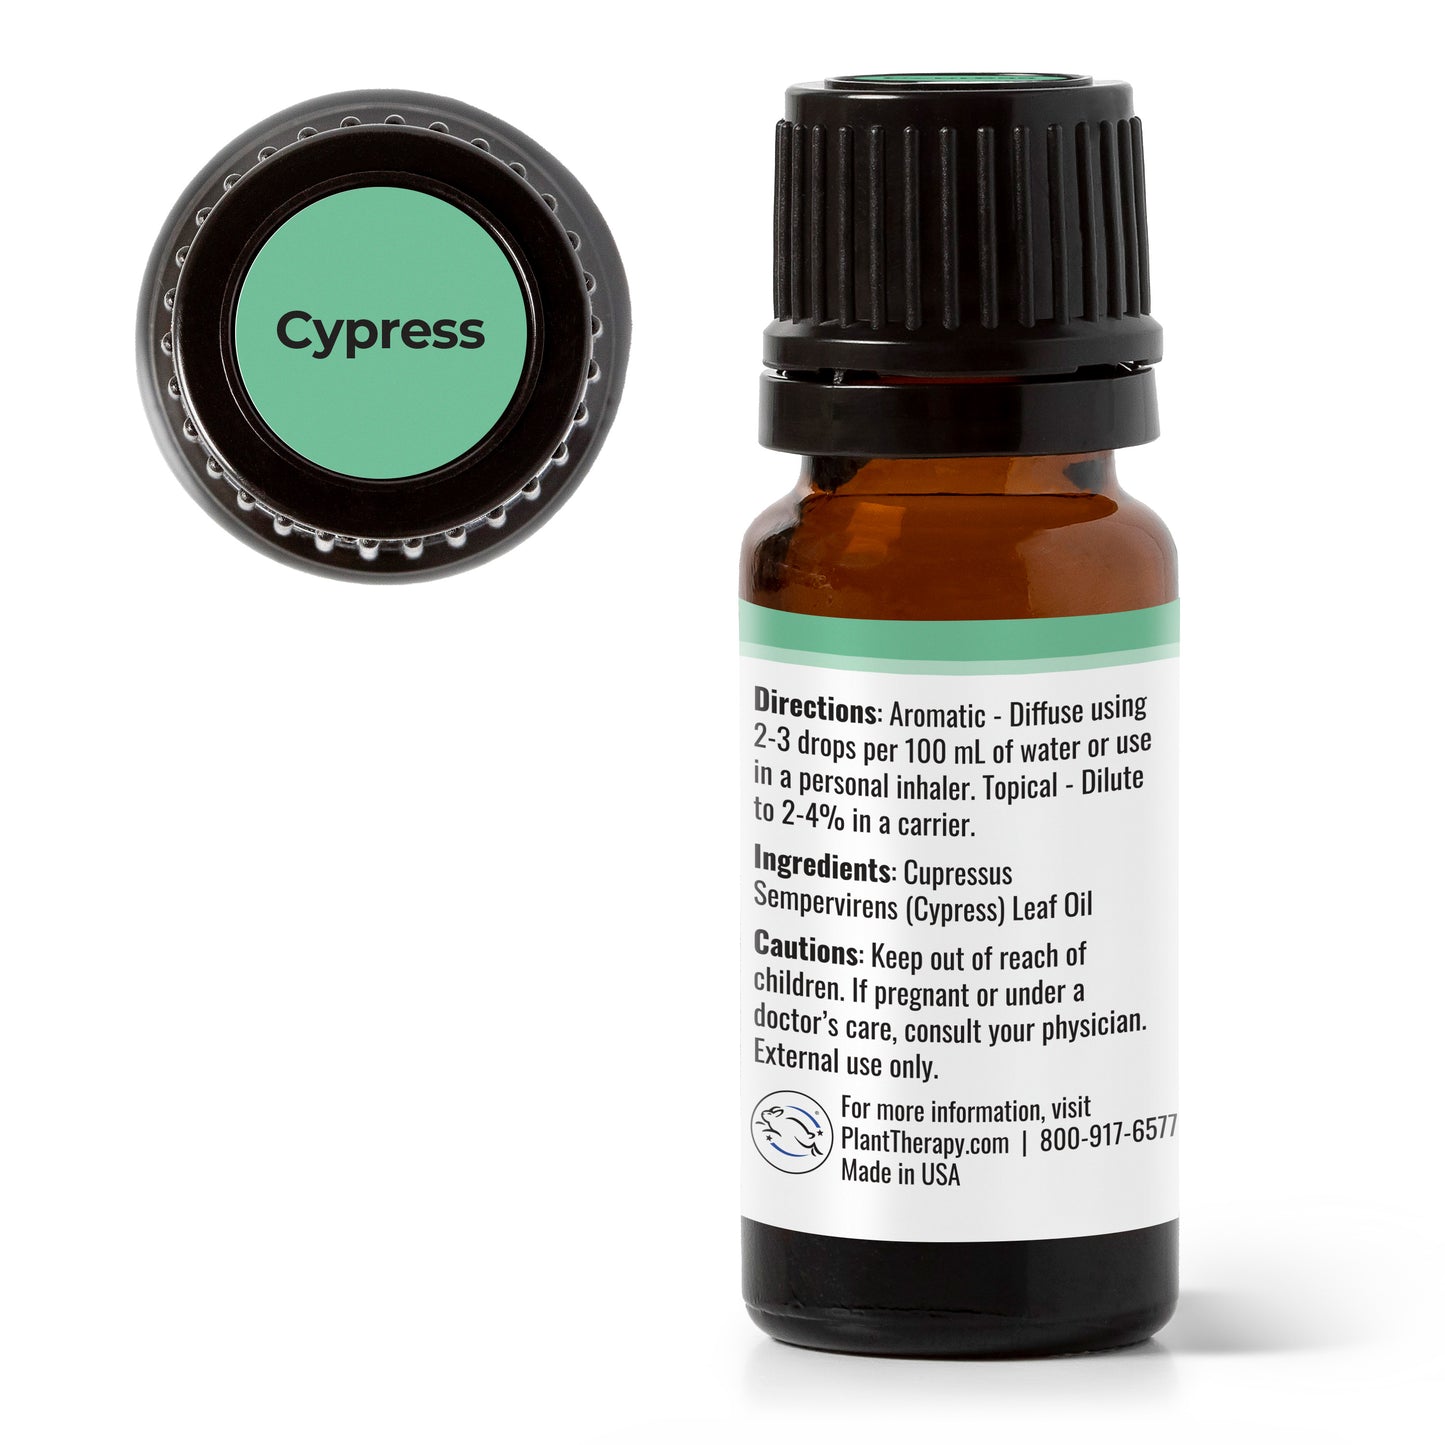 back label for Cypress Essential Oil with directions and ingredients